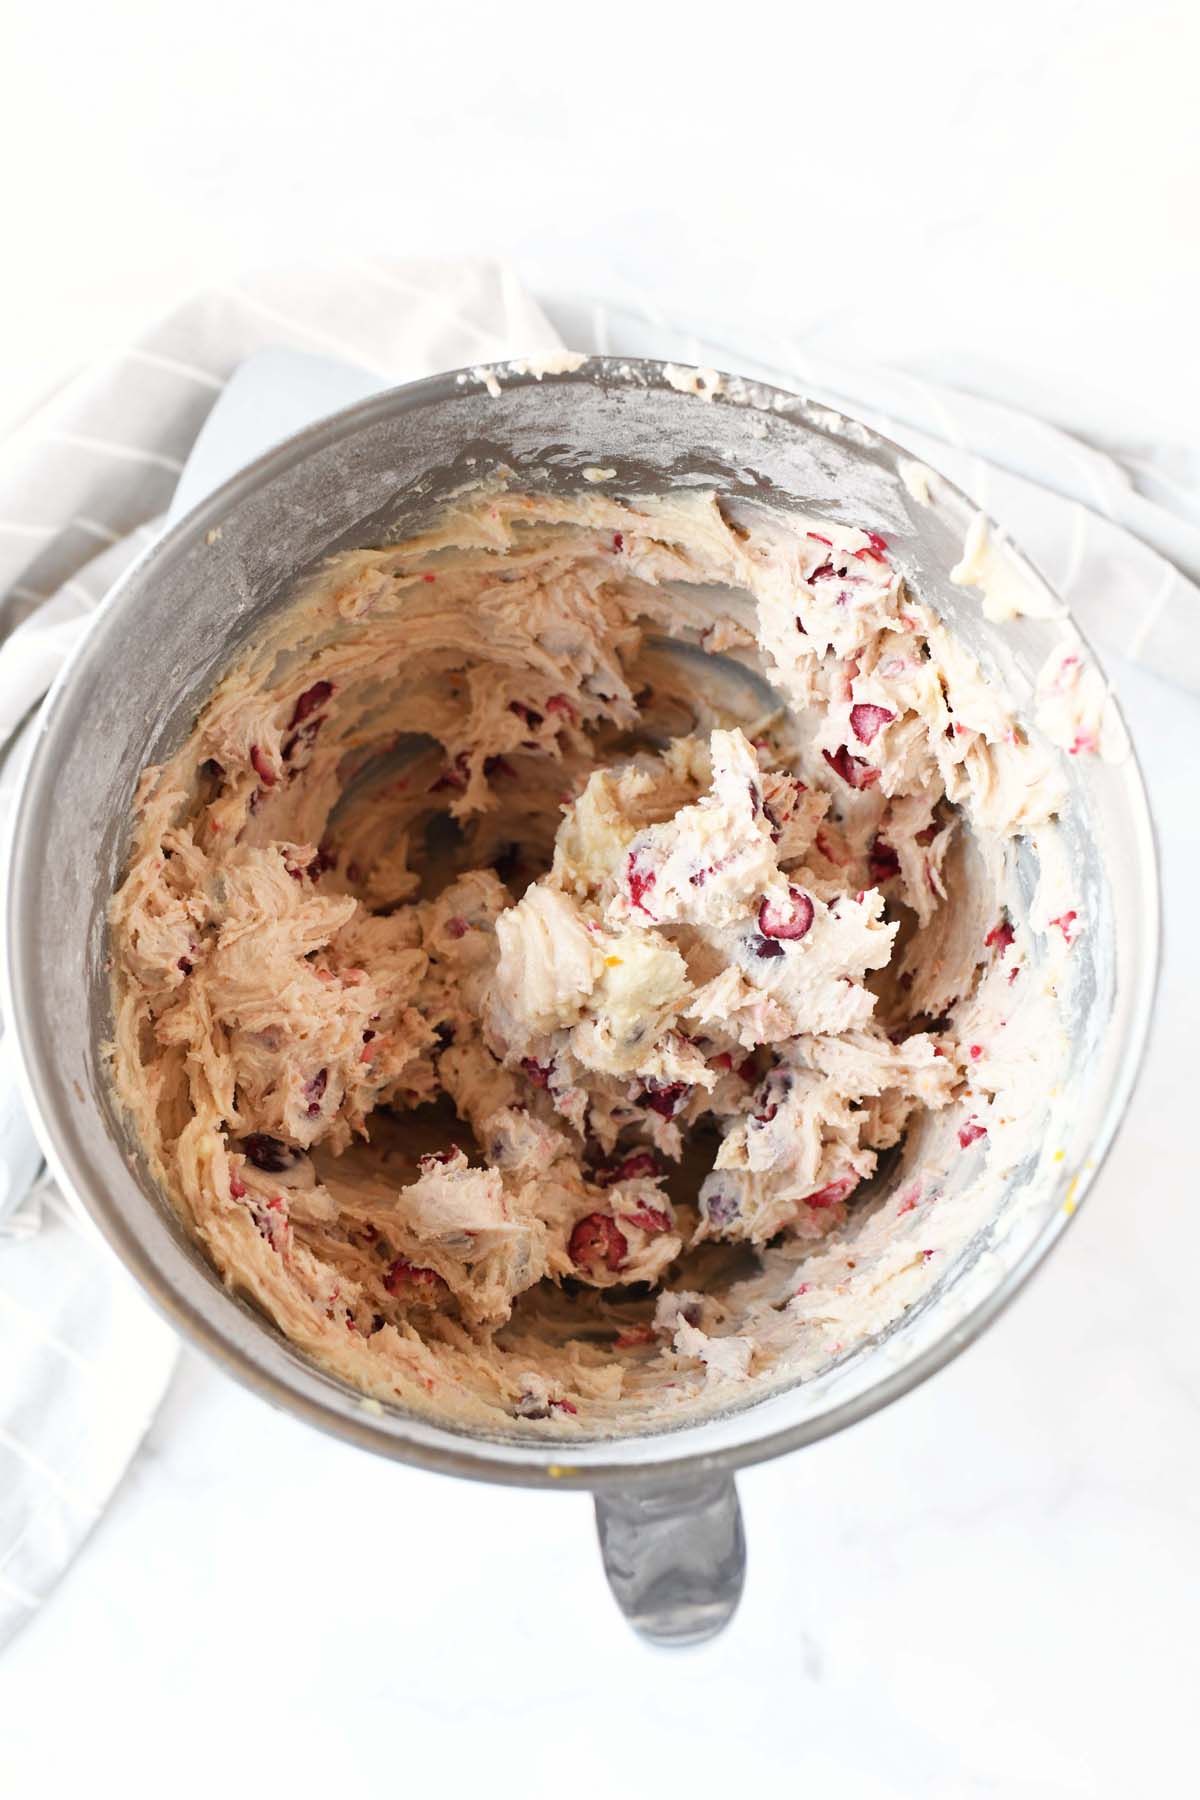 Cranberry Christmas cake batter in a stand mixer.